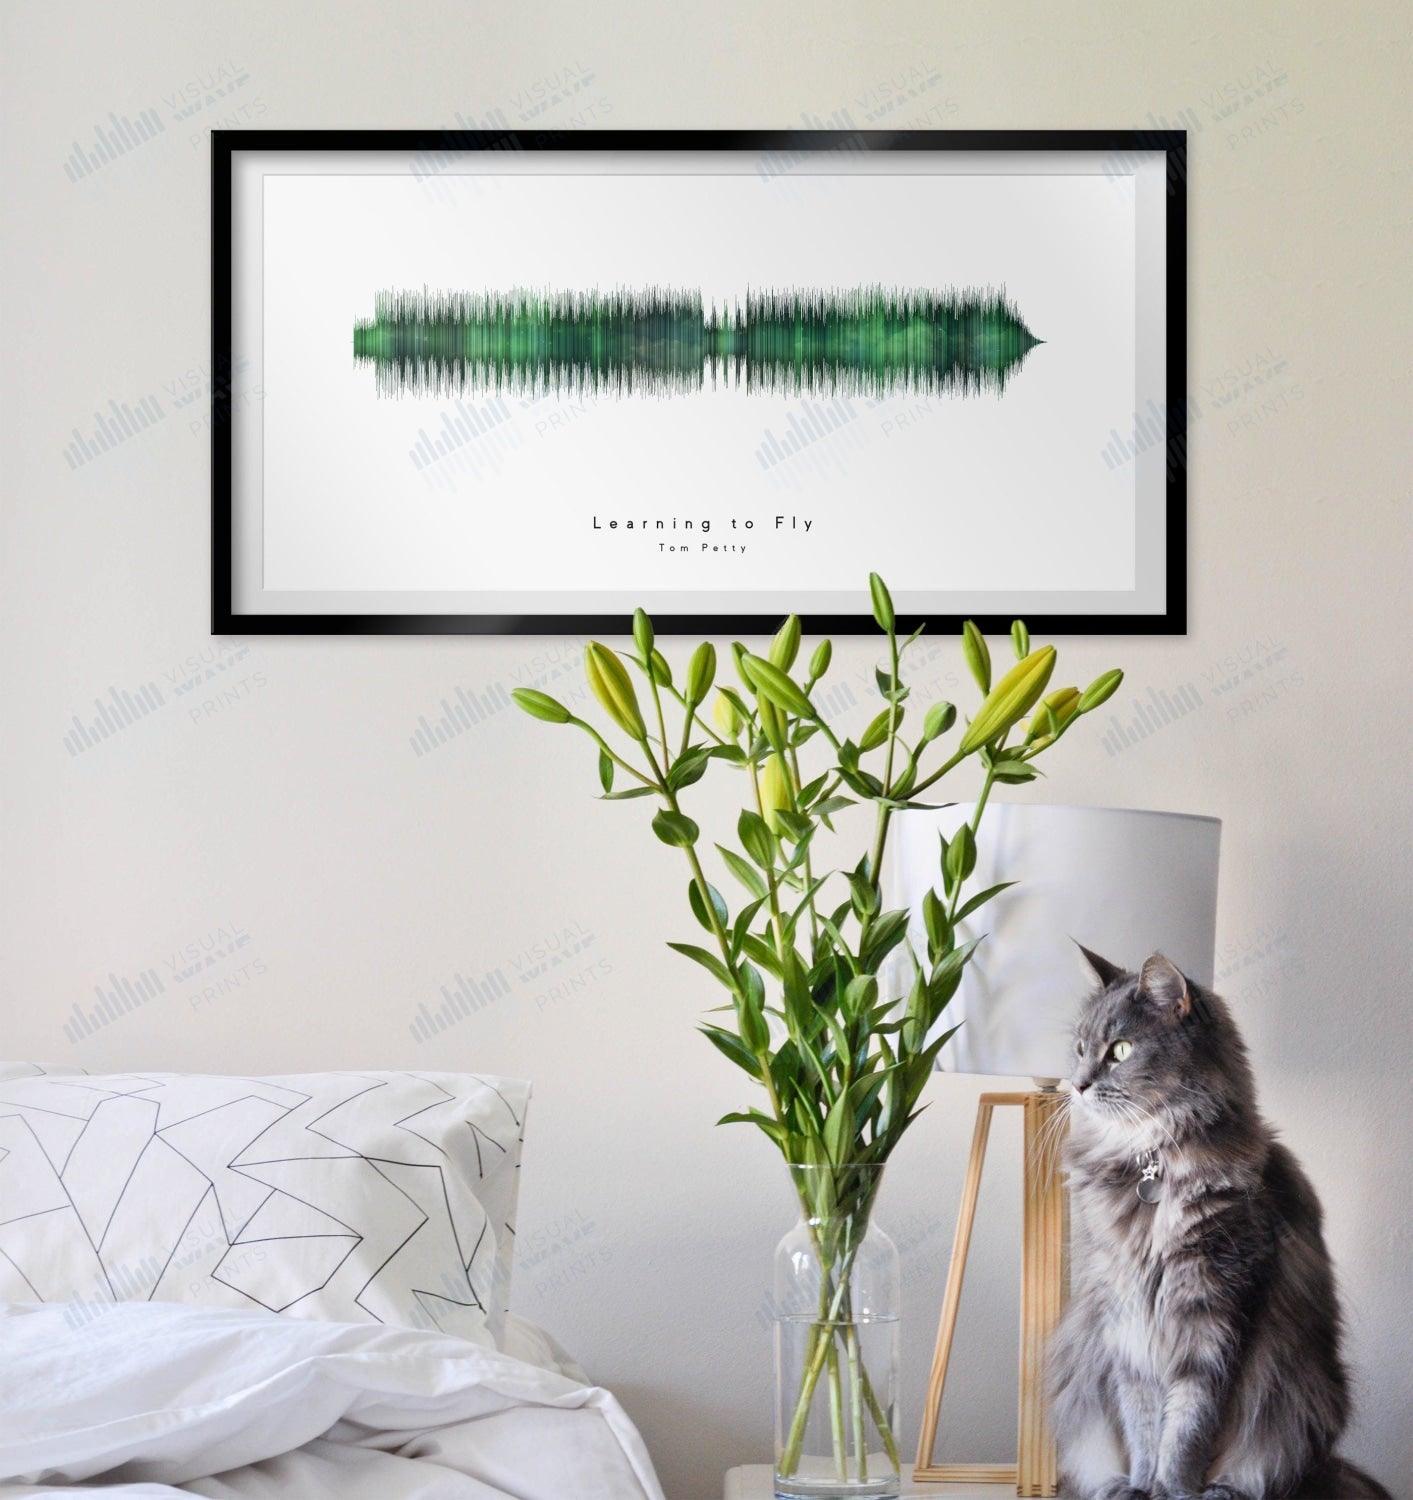 Learning to Fly by Tom Petty - Visual Wave Prints